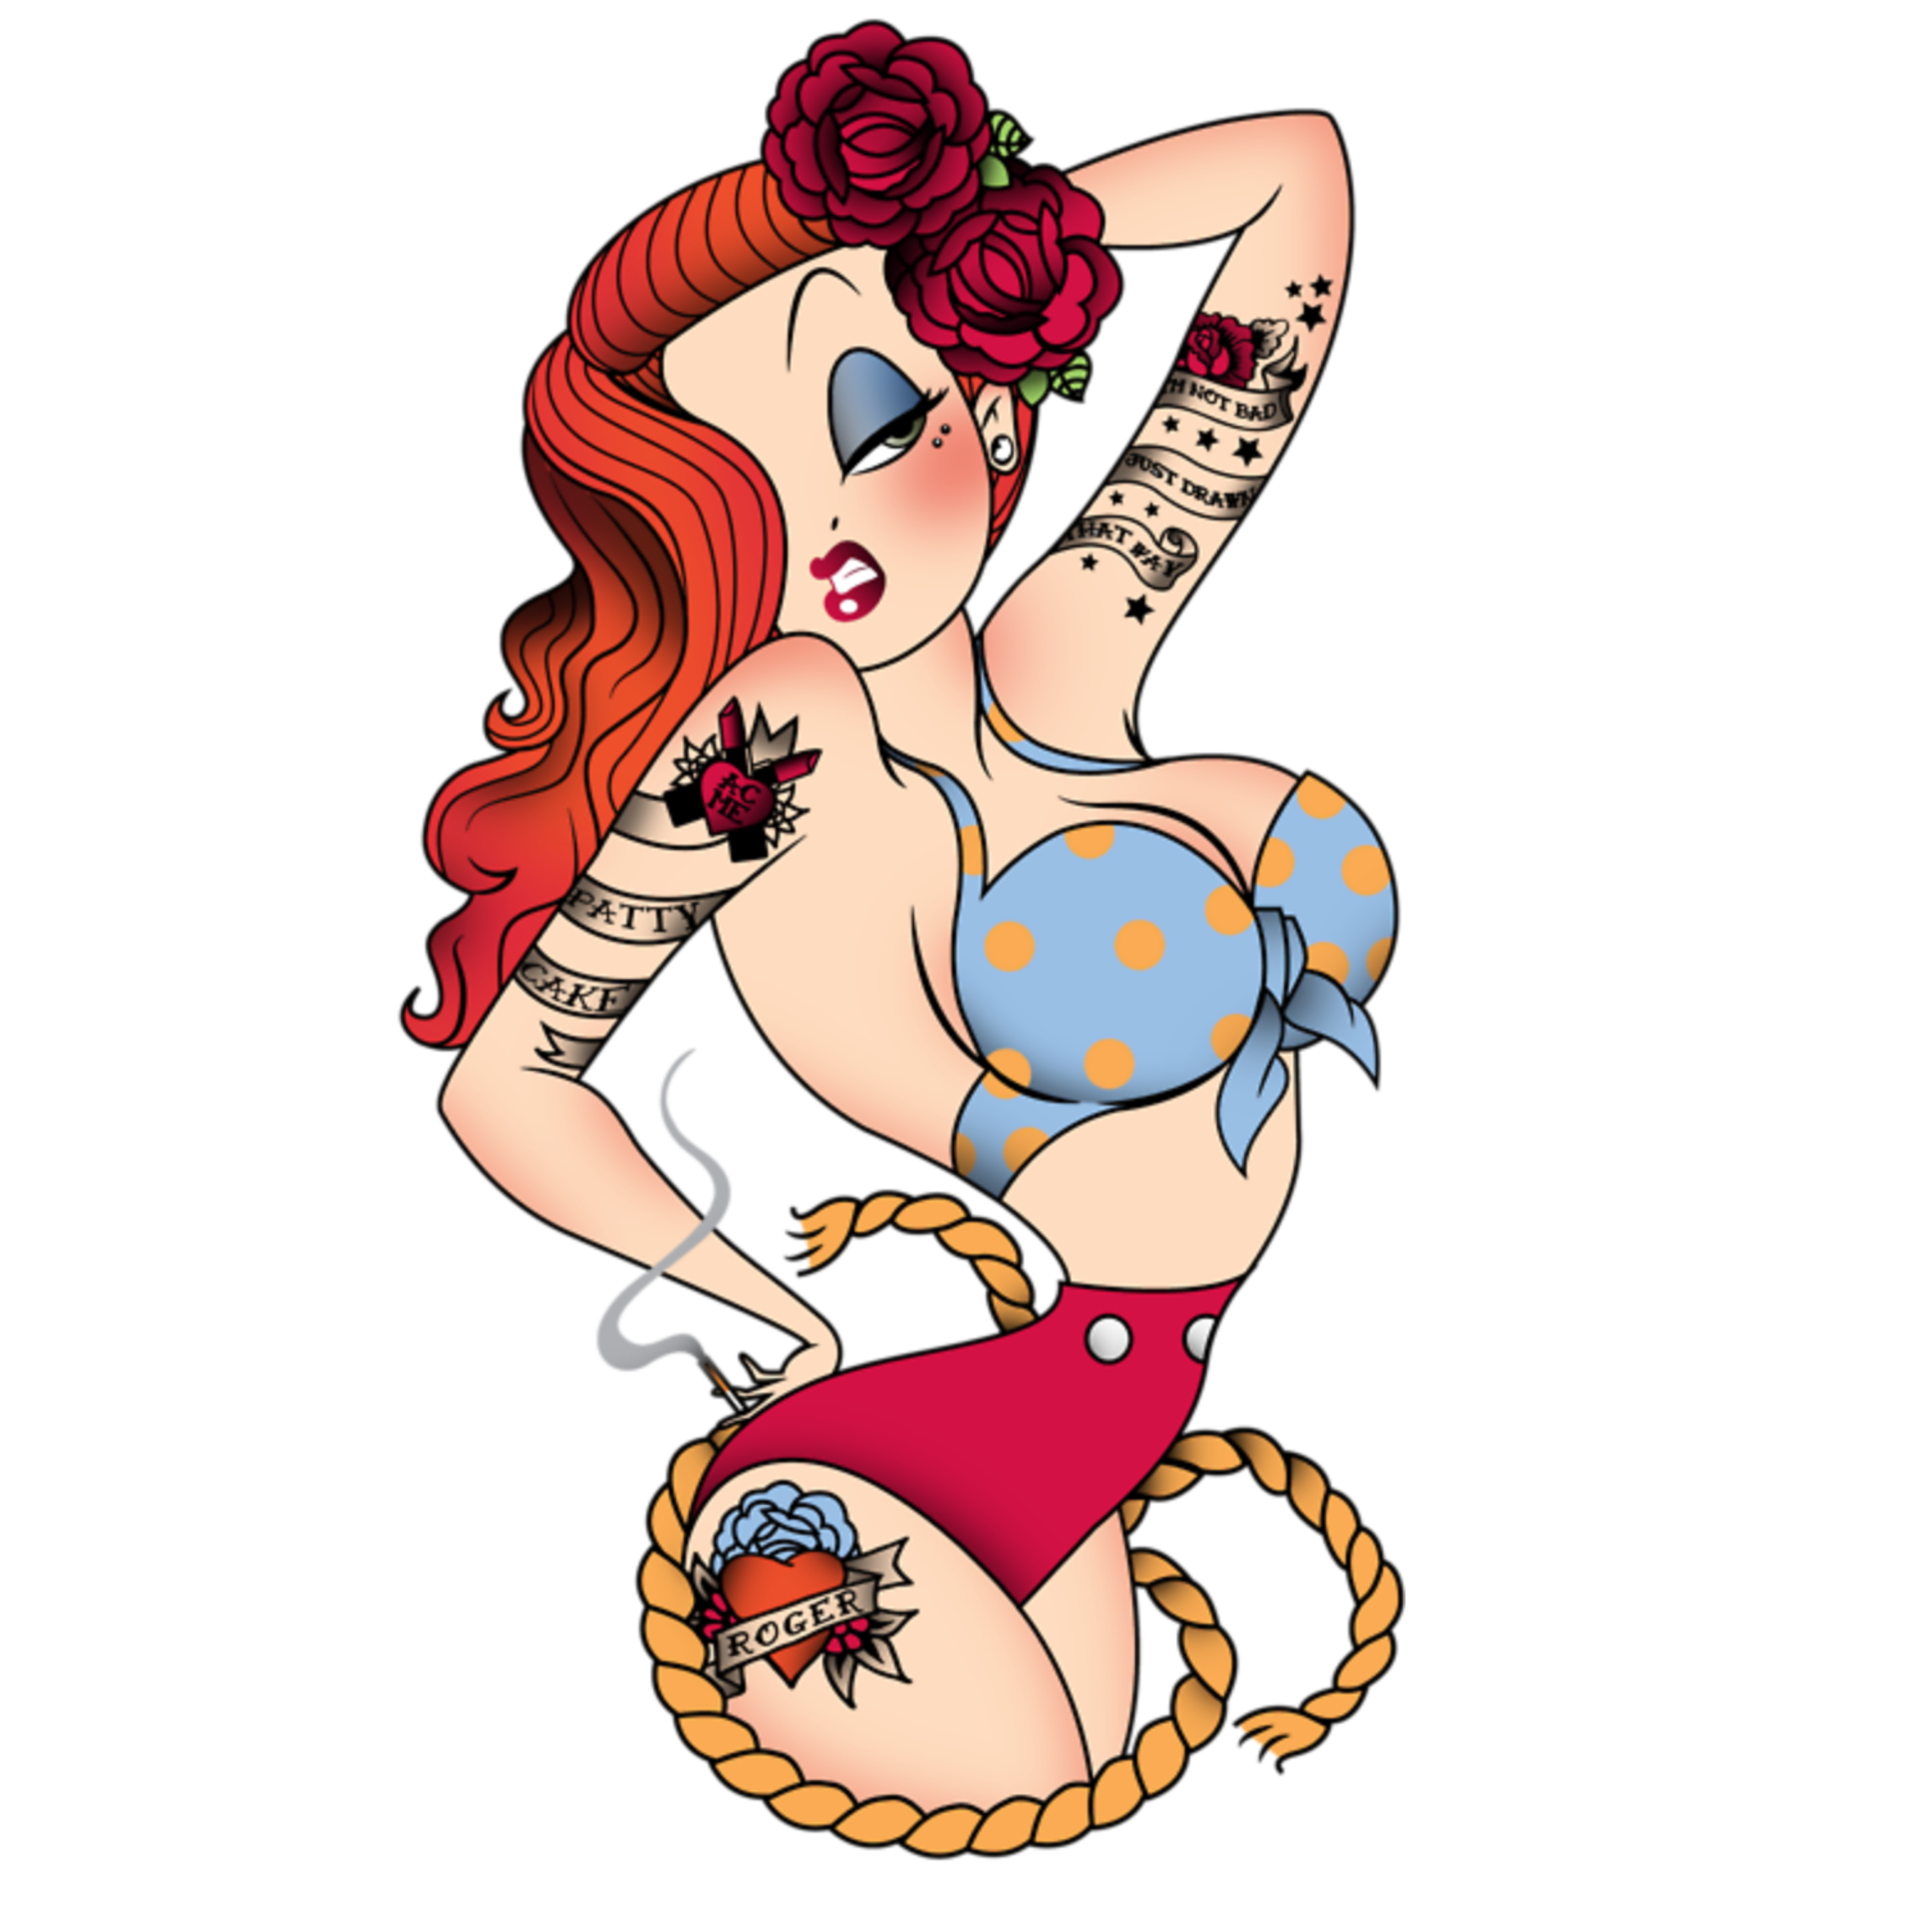 This visual is about mq girl sexy pinup tattoo freetoedit #mq #girl #sexy #pinup...